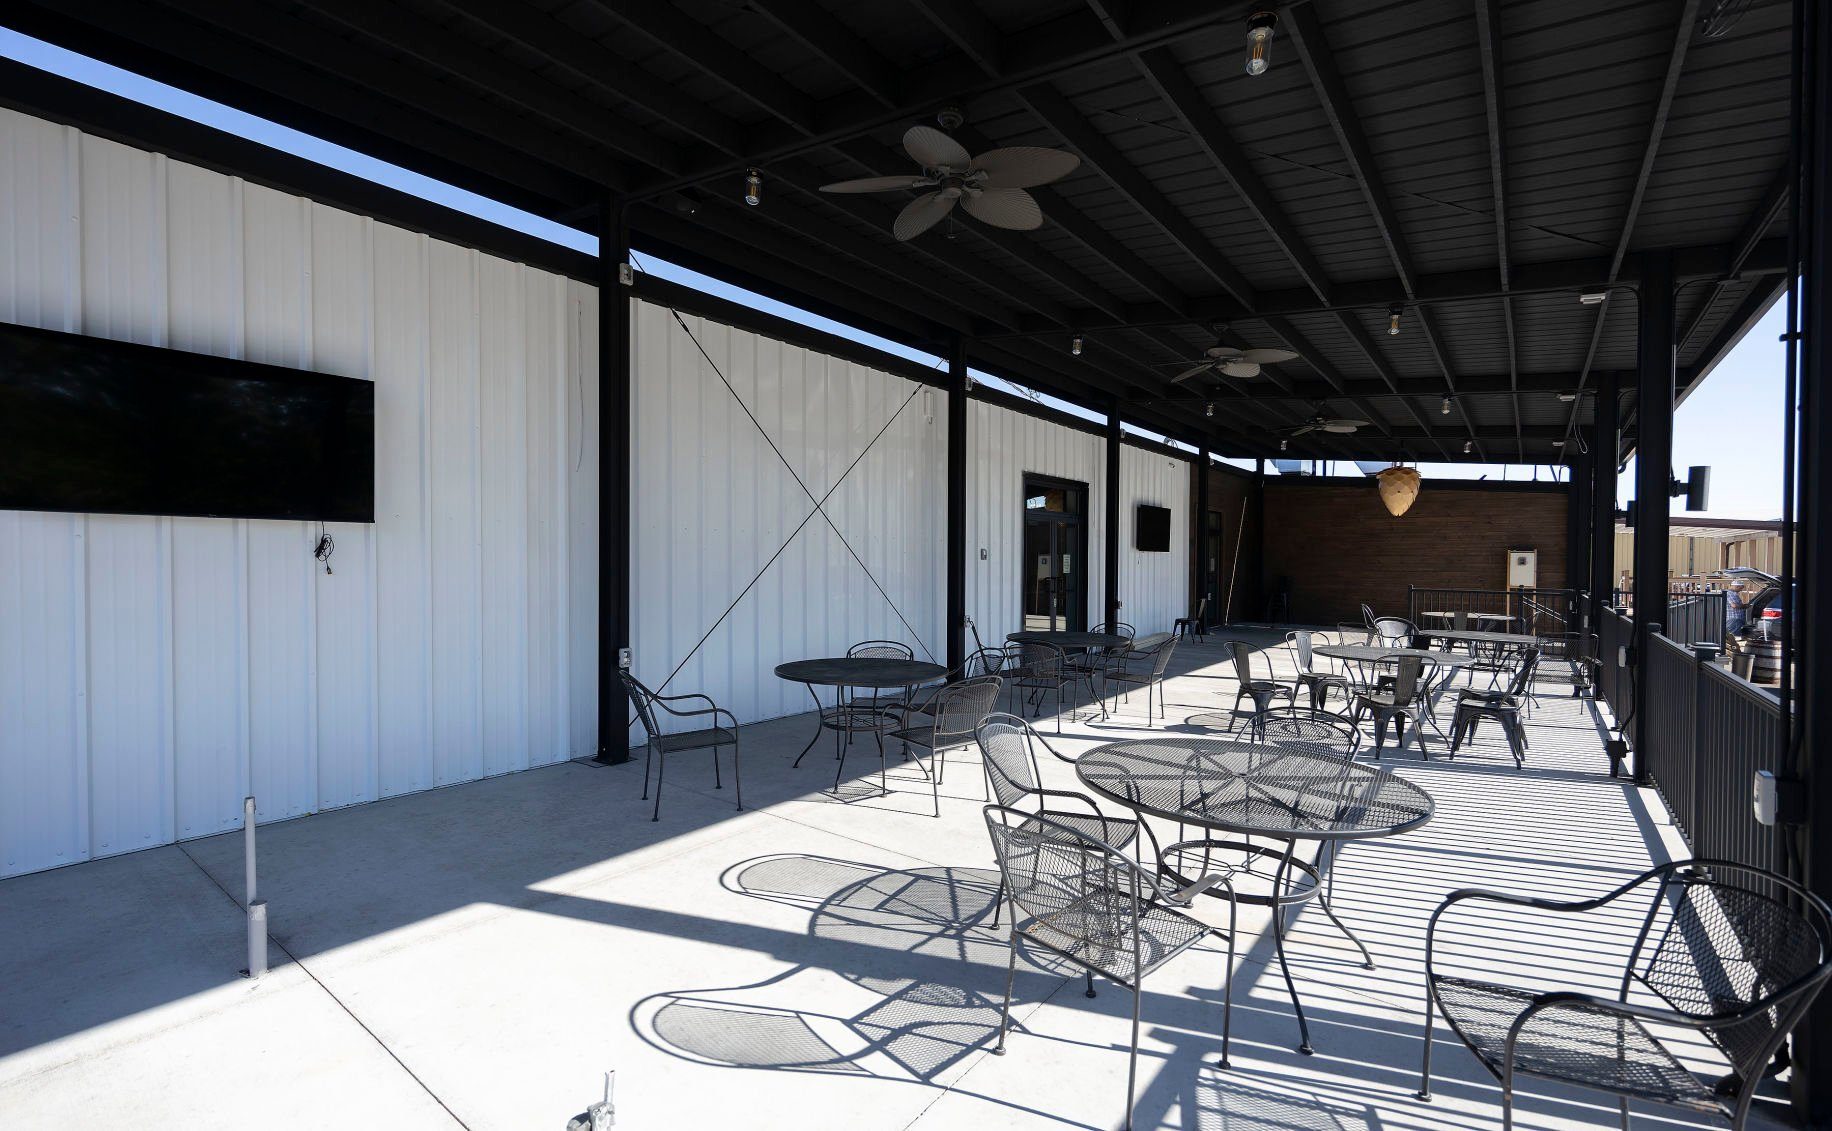 Outdoor patio seating at 7 Hills West in Dyersville, Iowa on Tuesday, Aug. 30, 2022.    PHOTO CREDIT: Stephen Gassman